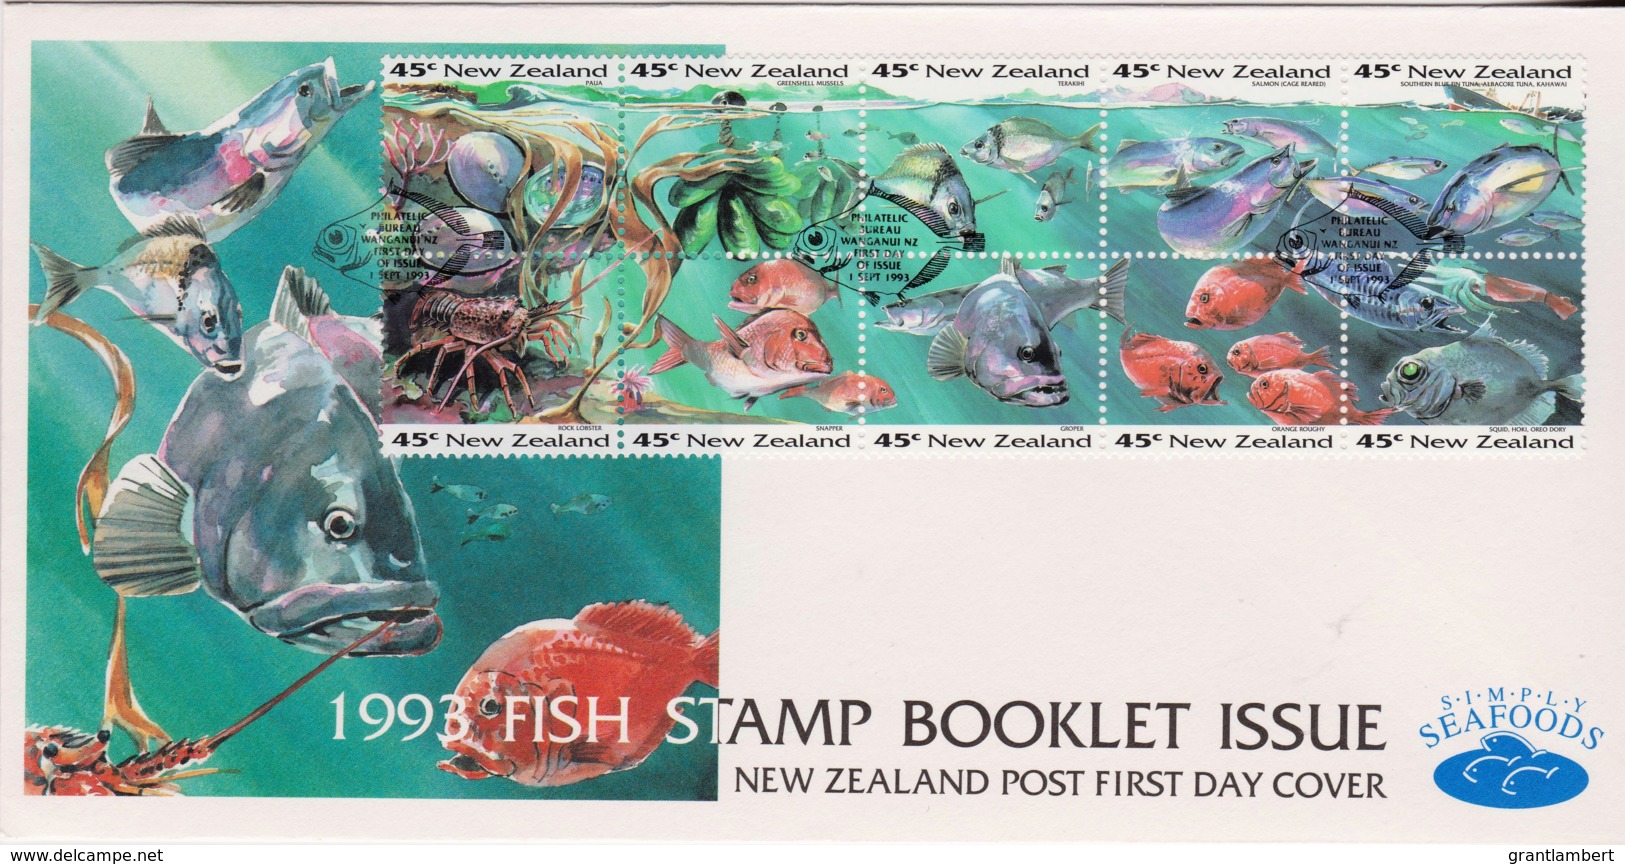 New Zealand 1993 Fish Stamp Booklet Issue FDC - FDC